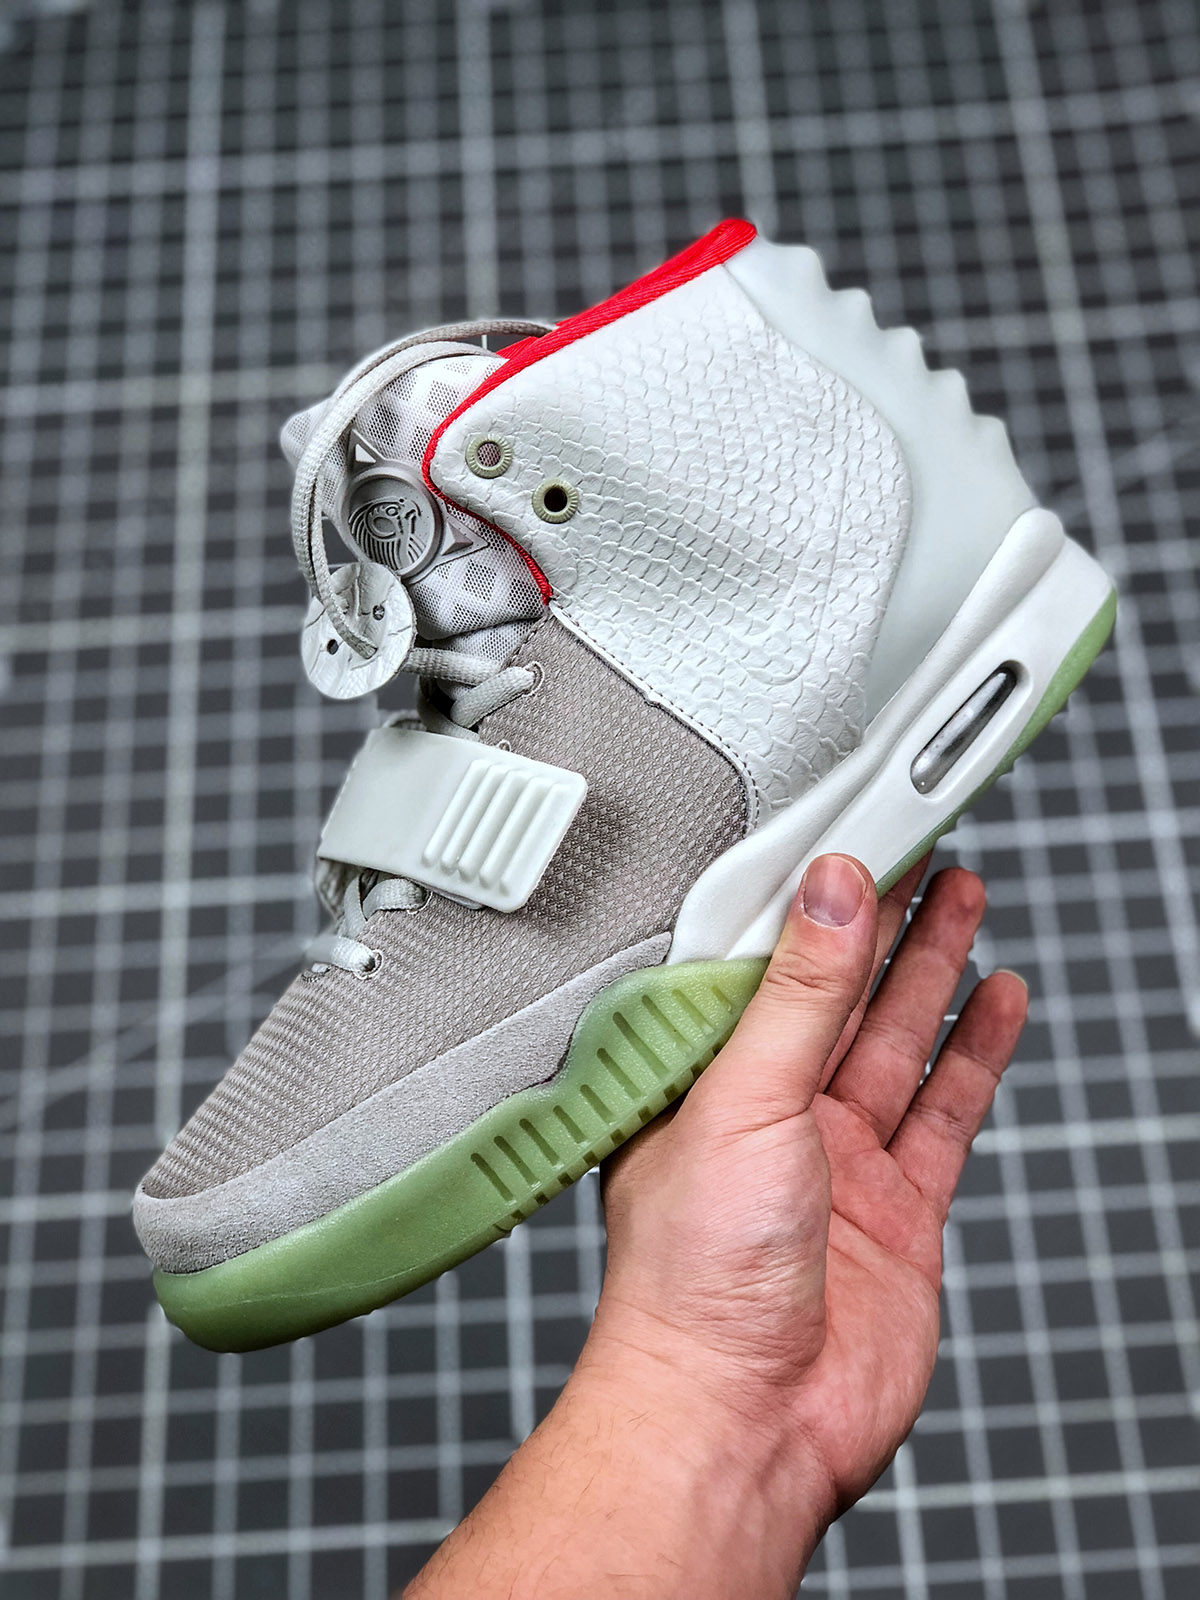 Nike Air Yeezy Wolf Grey/Pure Platinum For Sale Hello